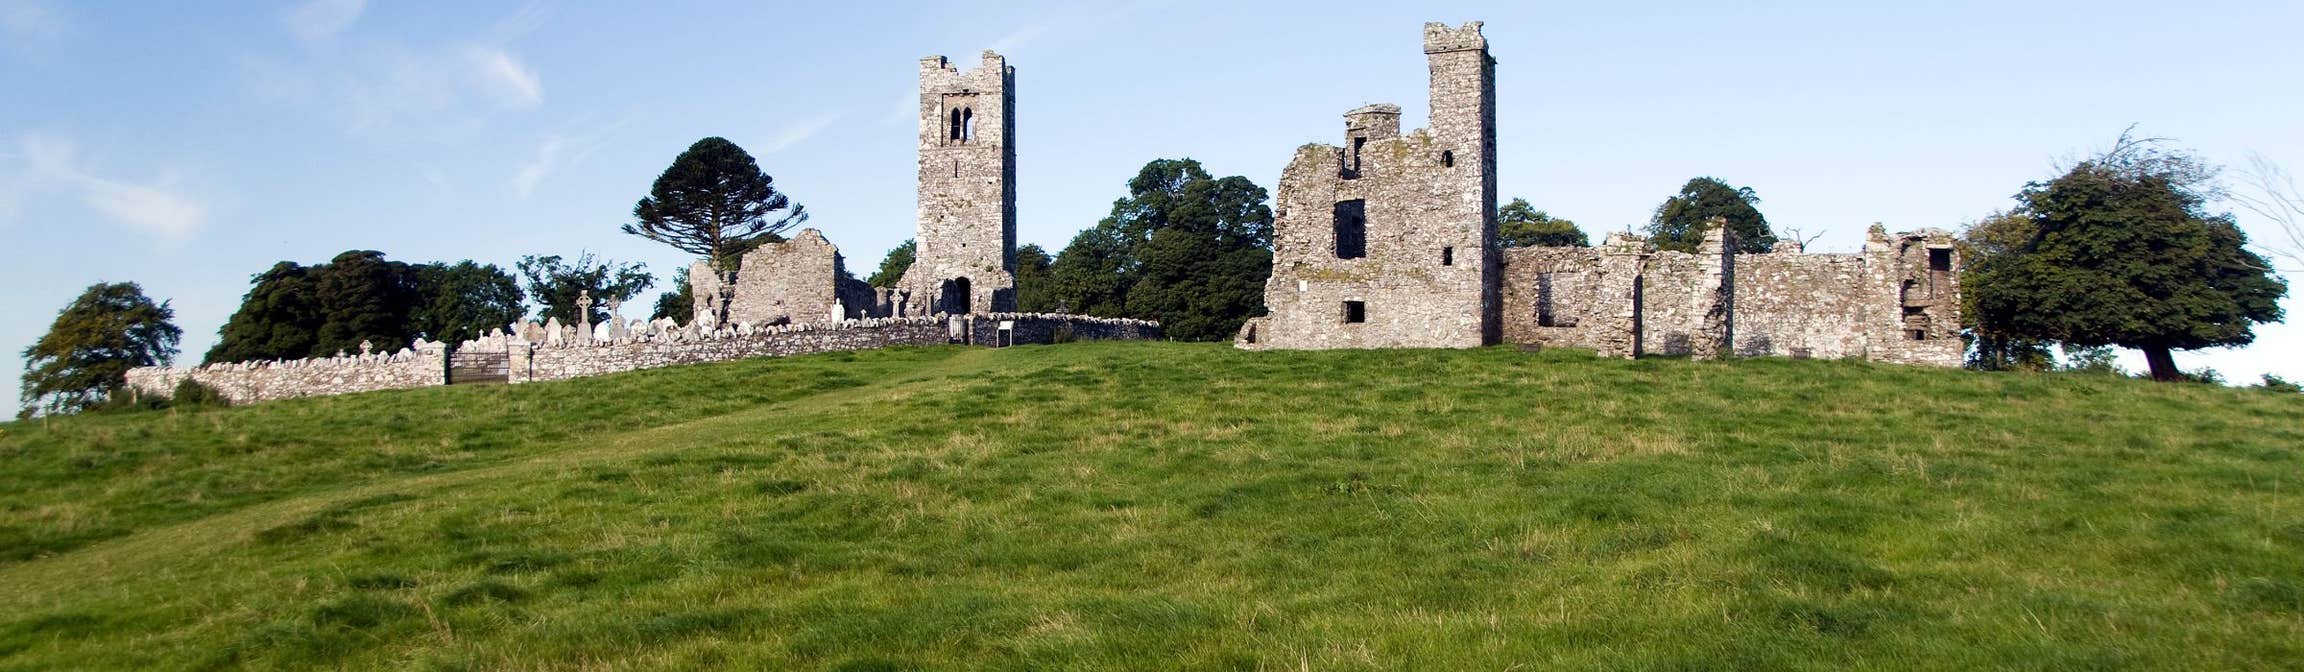 Image of the Hill of Slane in County Meath